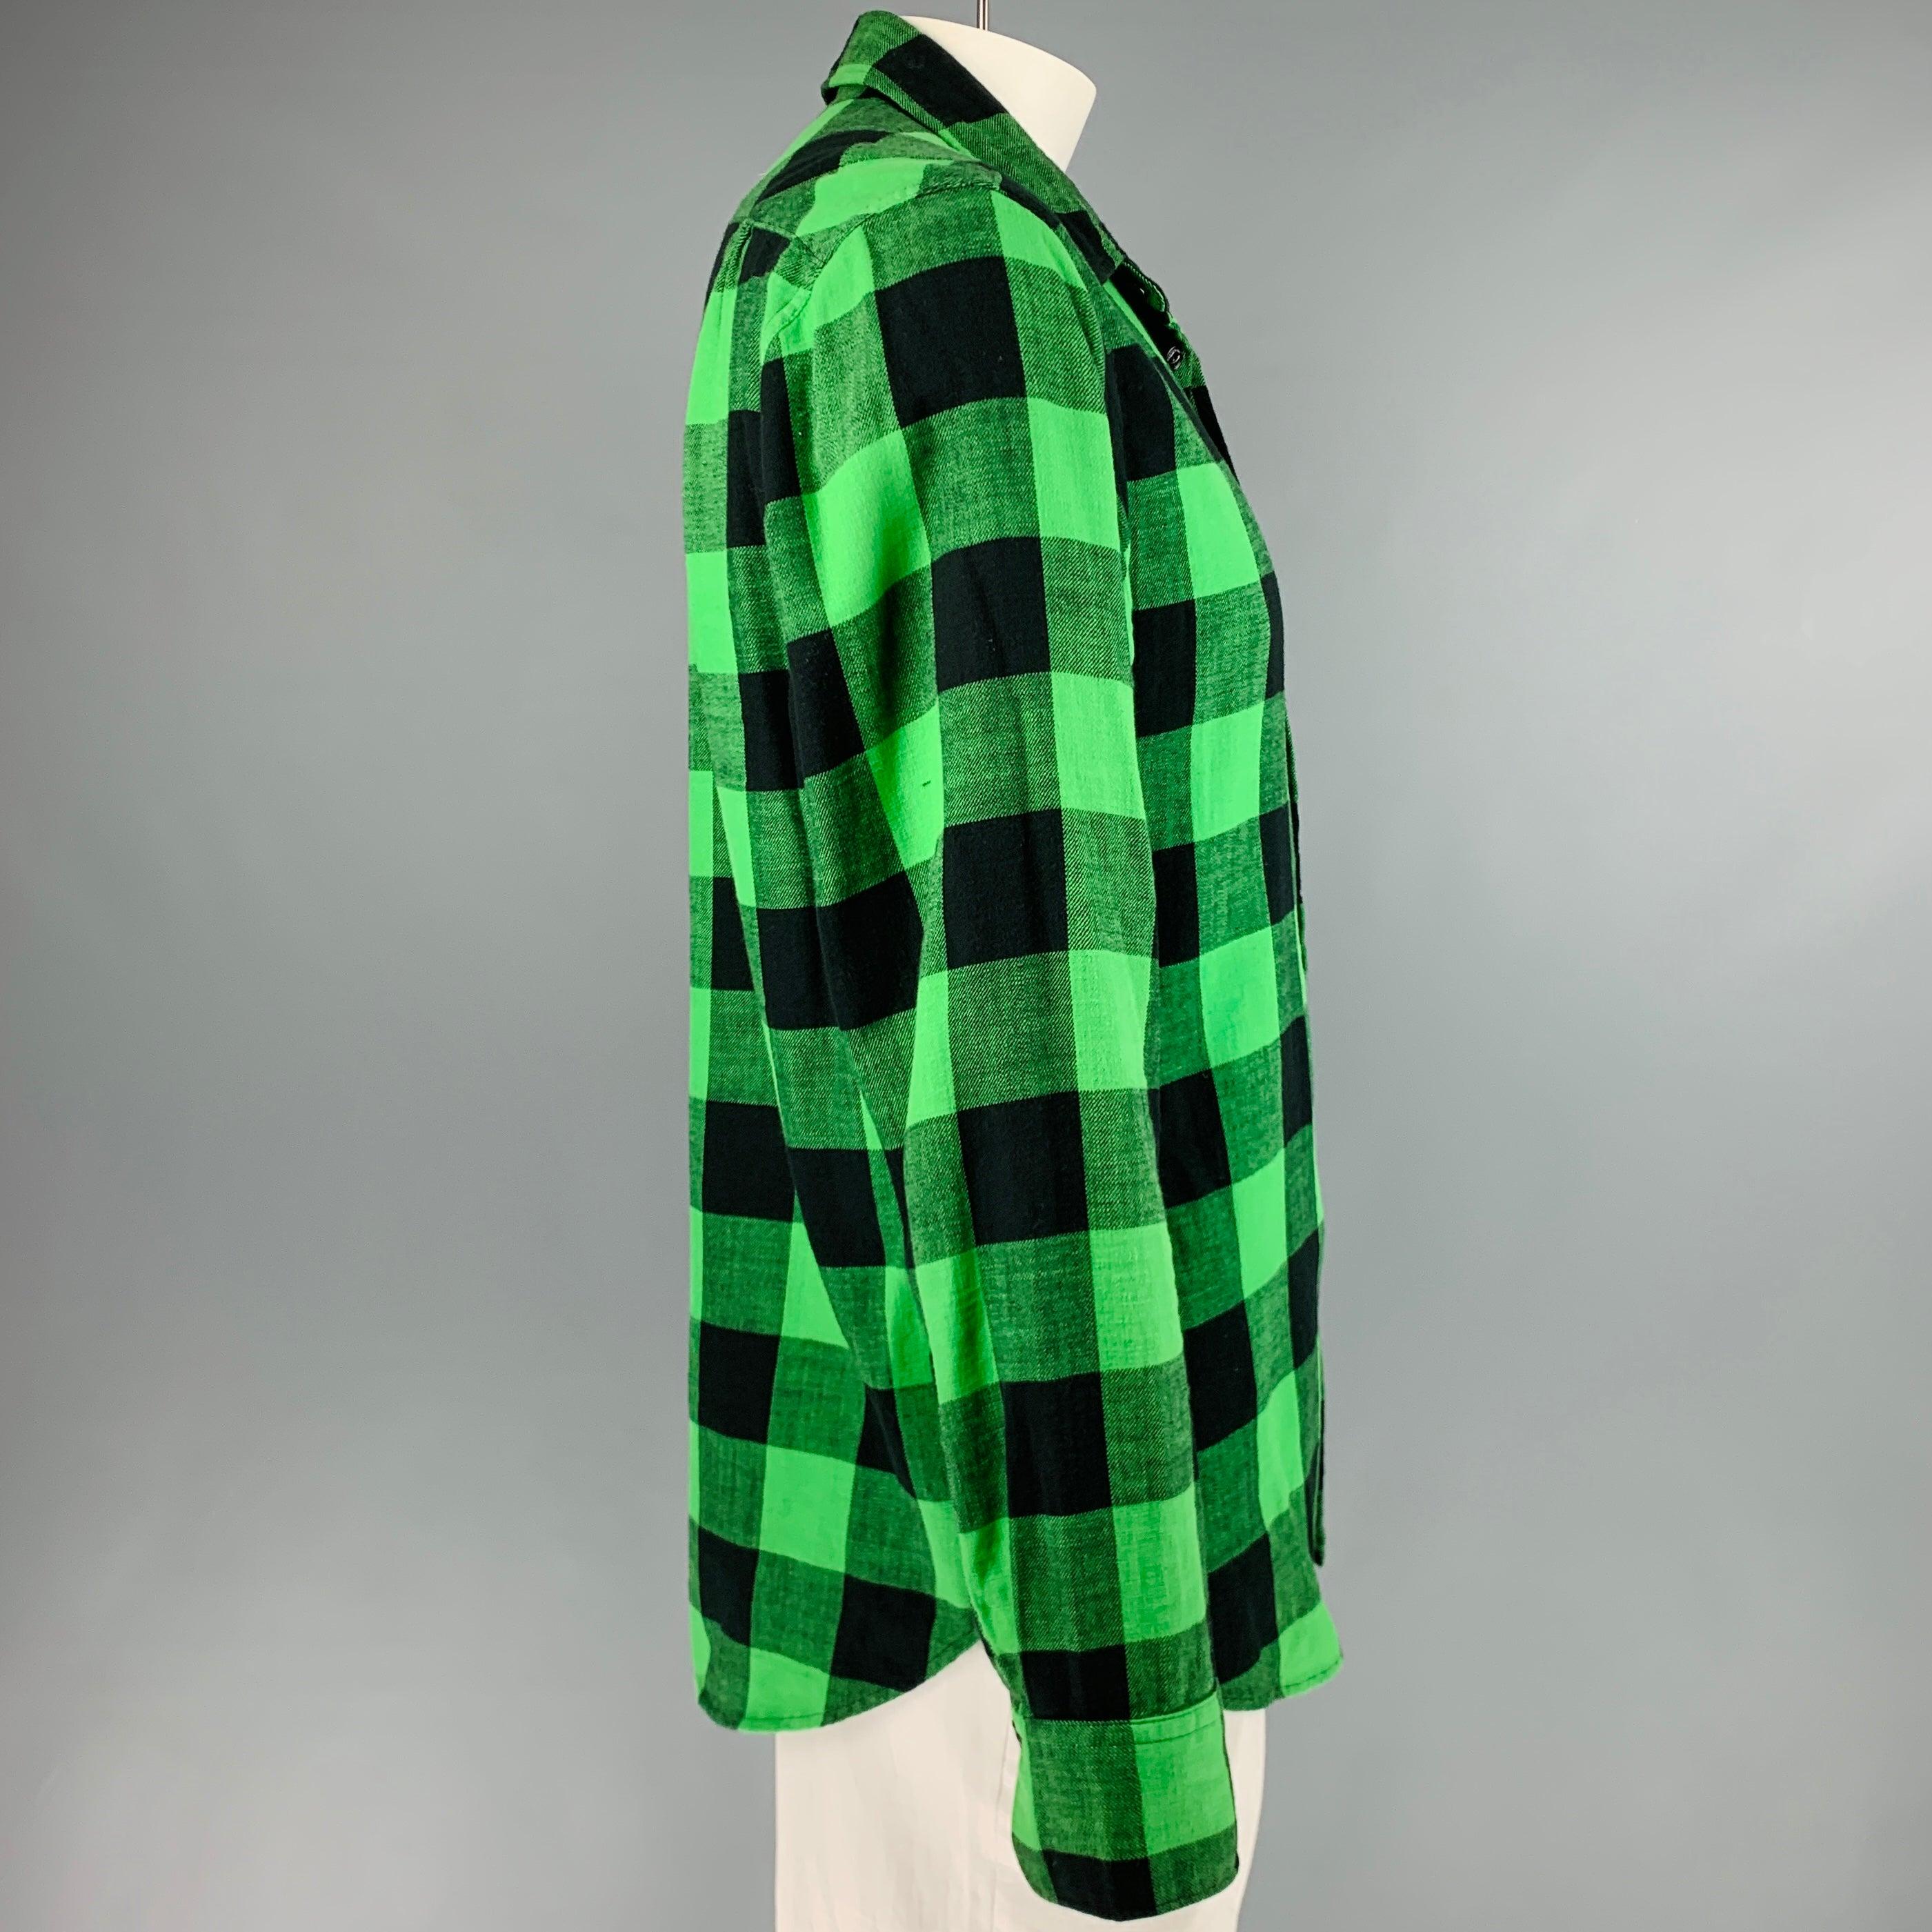 RAG & BONE long sleeve shirt
in a green and black cotton fabric featuring buffalo plaid pattern, one pocket, and a button closure. Very Good Pre-Owned Condition. Minor signs of wear. 

Marked:   L 

Measurements: 
 
Shoulder: 18 inches Chest: 43